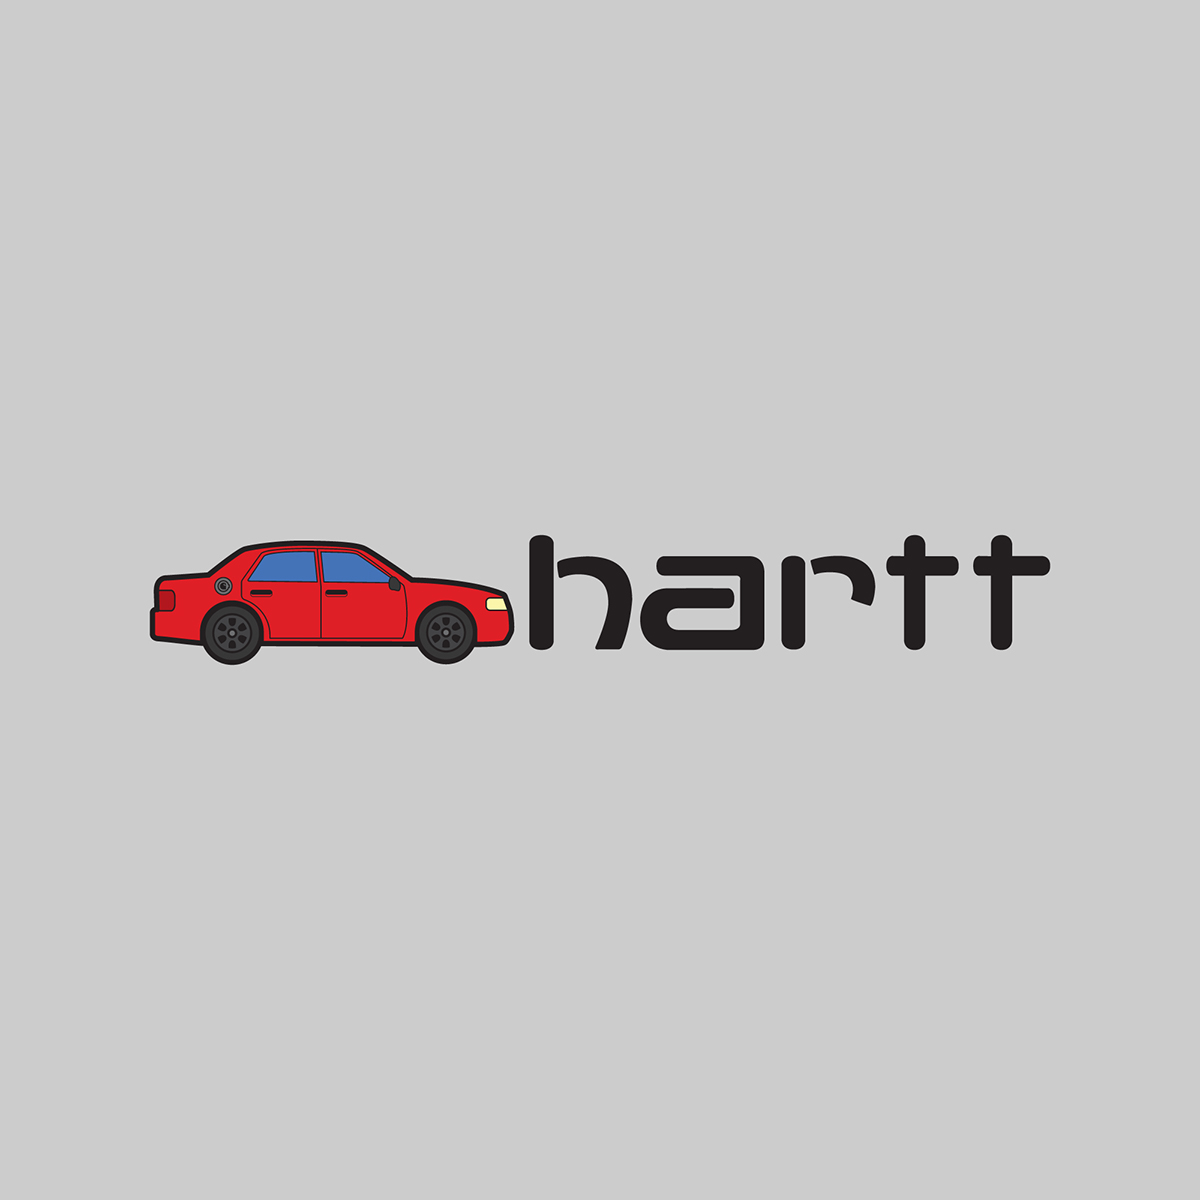 carhartt unofficial trademark logo snip graphics snipgraphics muscle gym car brand Clothing wip CarharttWIP snpgrphcs